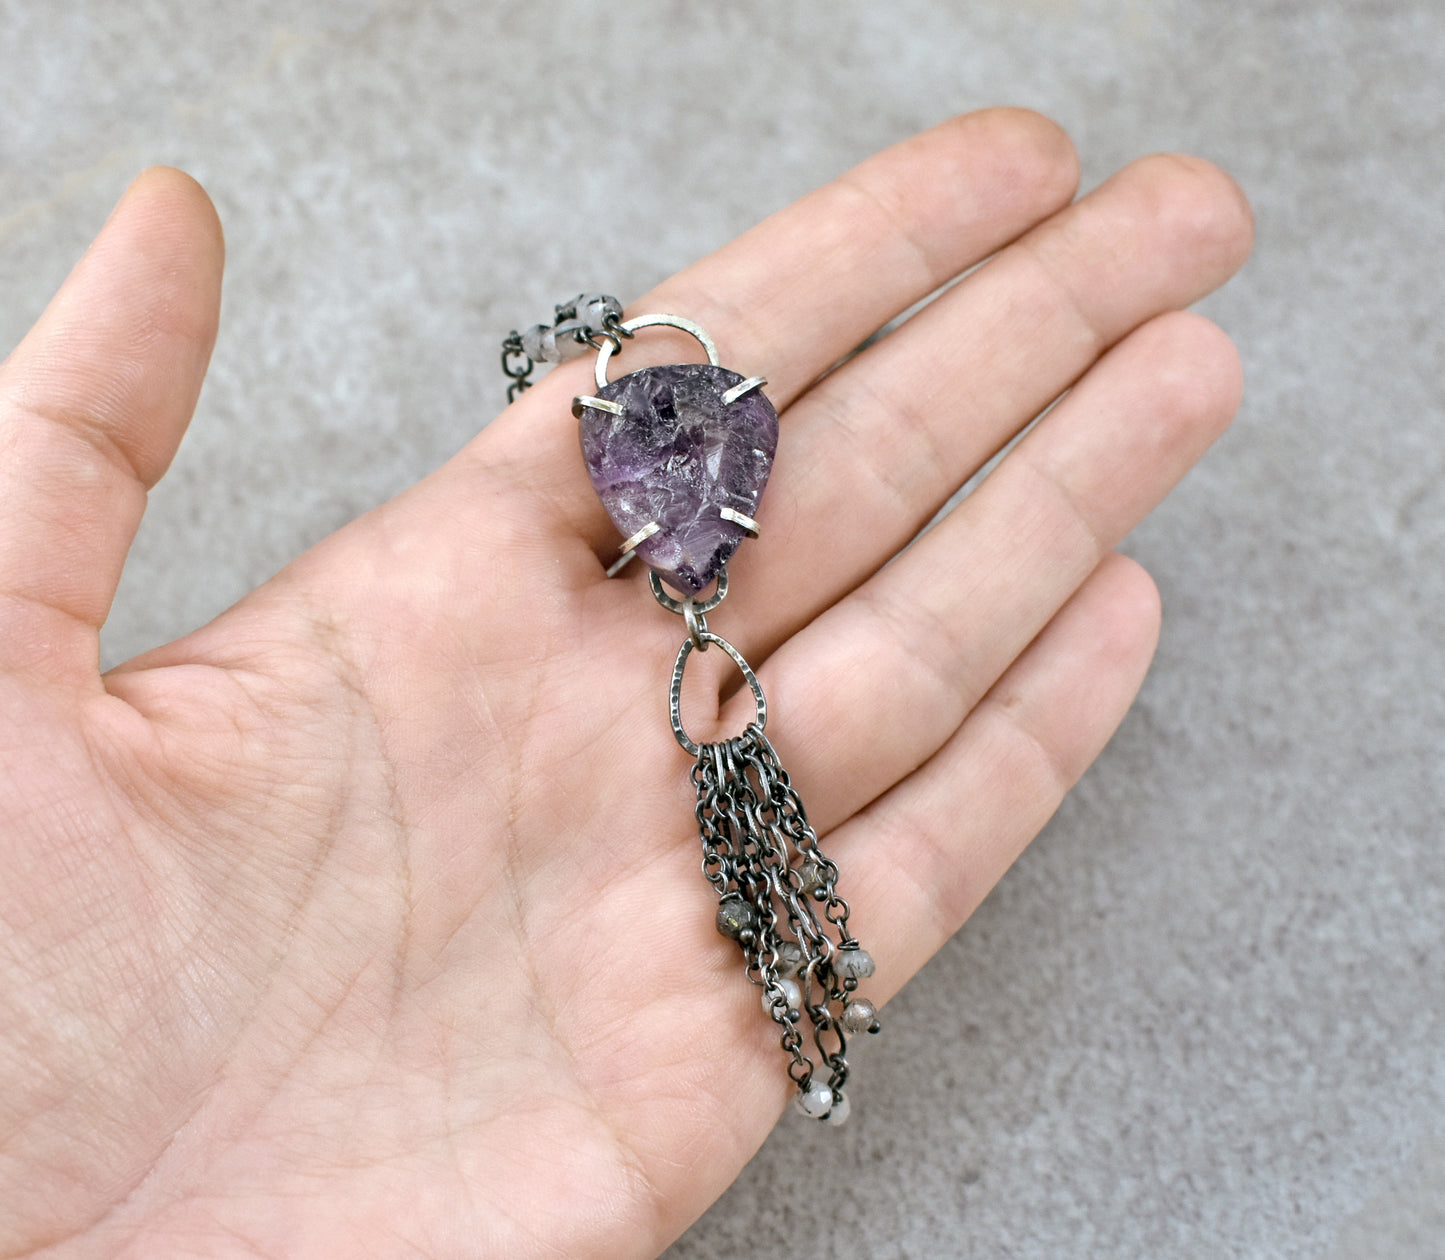 Raw Amethyst and Sterling Silver Prong Necklace, Artisan Purple Stone Pendant with Long Chain